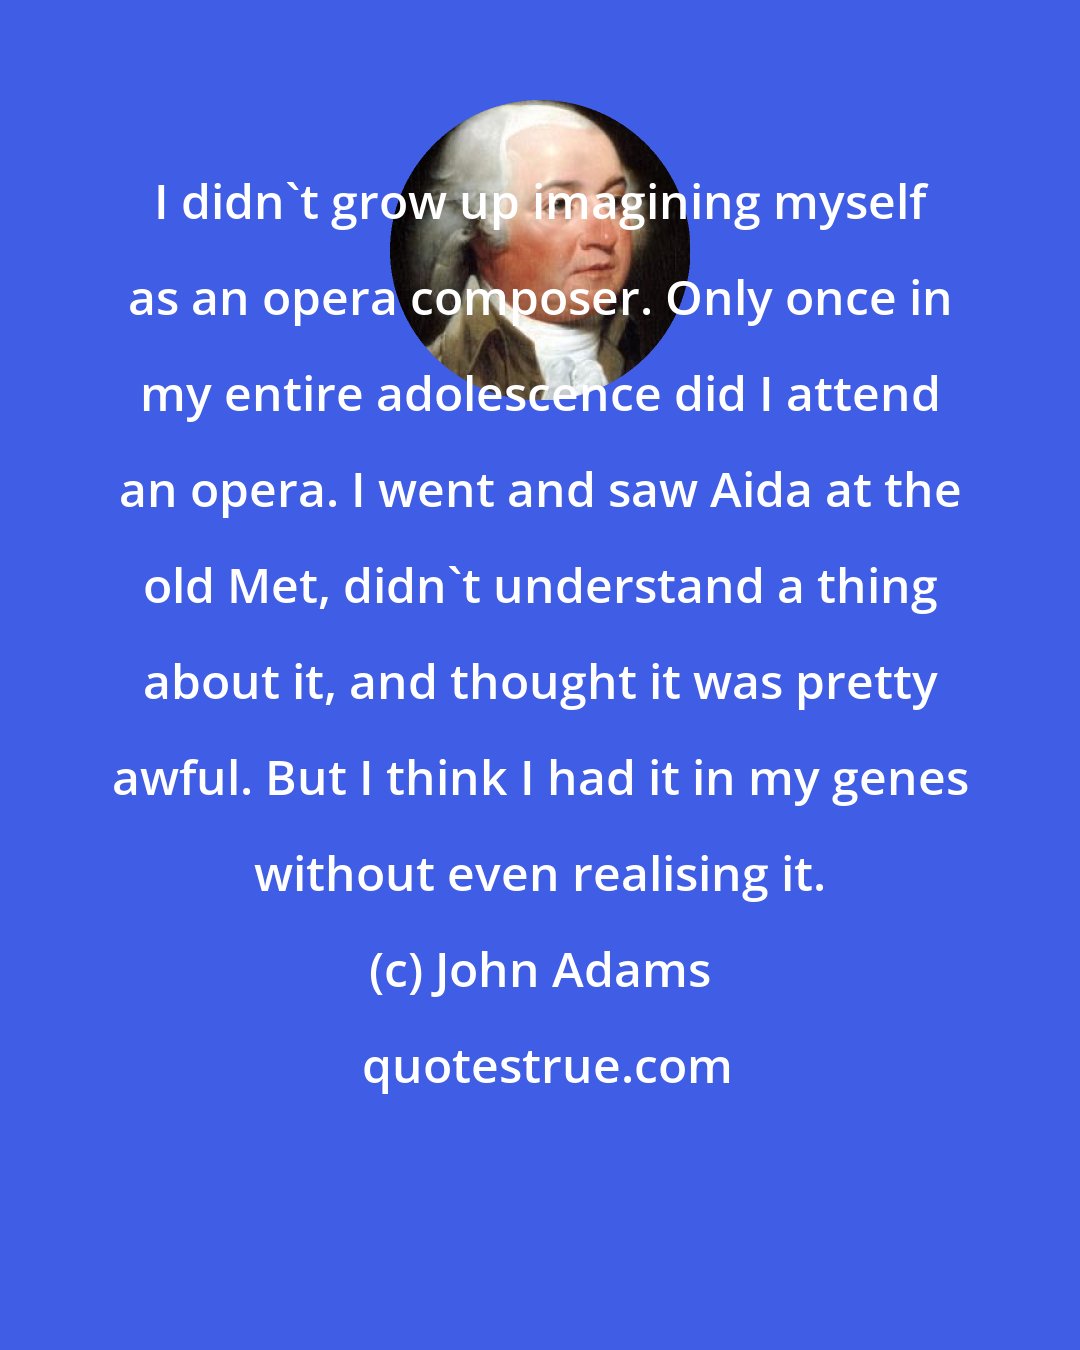 John Adams: I didn't grow up imagining myself as an opera composer. Only once in my entire adolescence did I attend an opera. I went and saw Aida at the old Met, didn't understand a thing about it, and thought it was pretty awful. But I think I had it in my genes without even realising it.